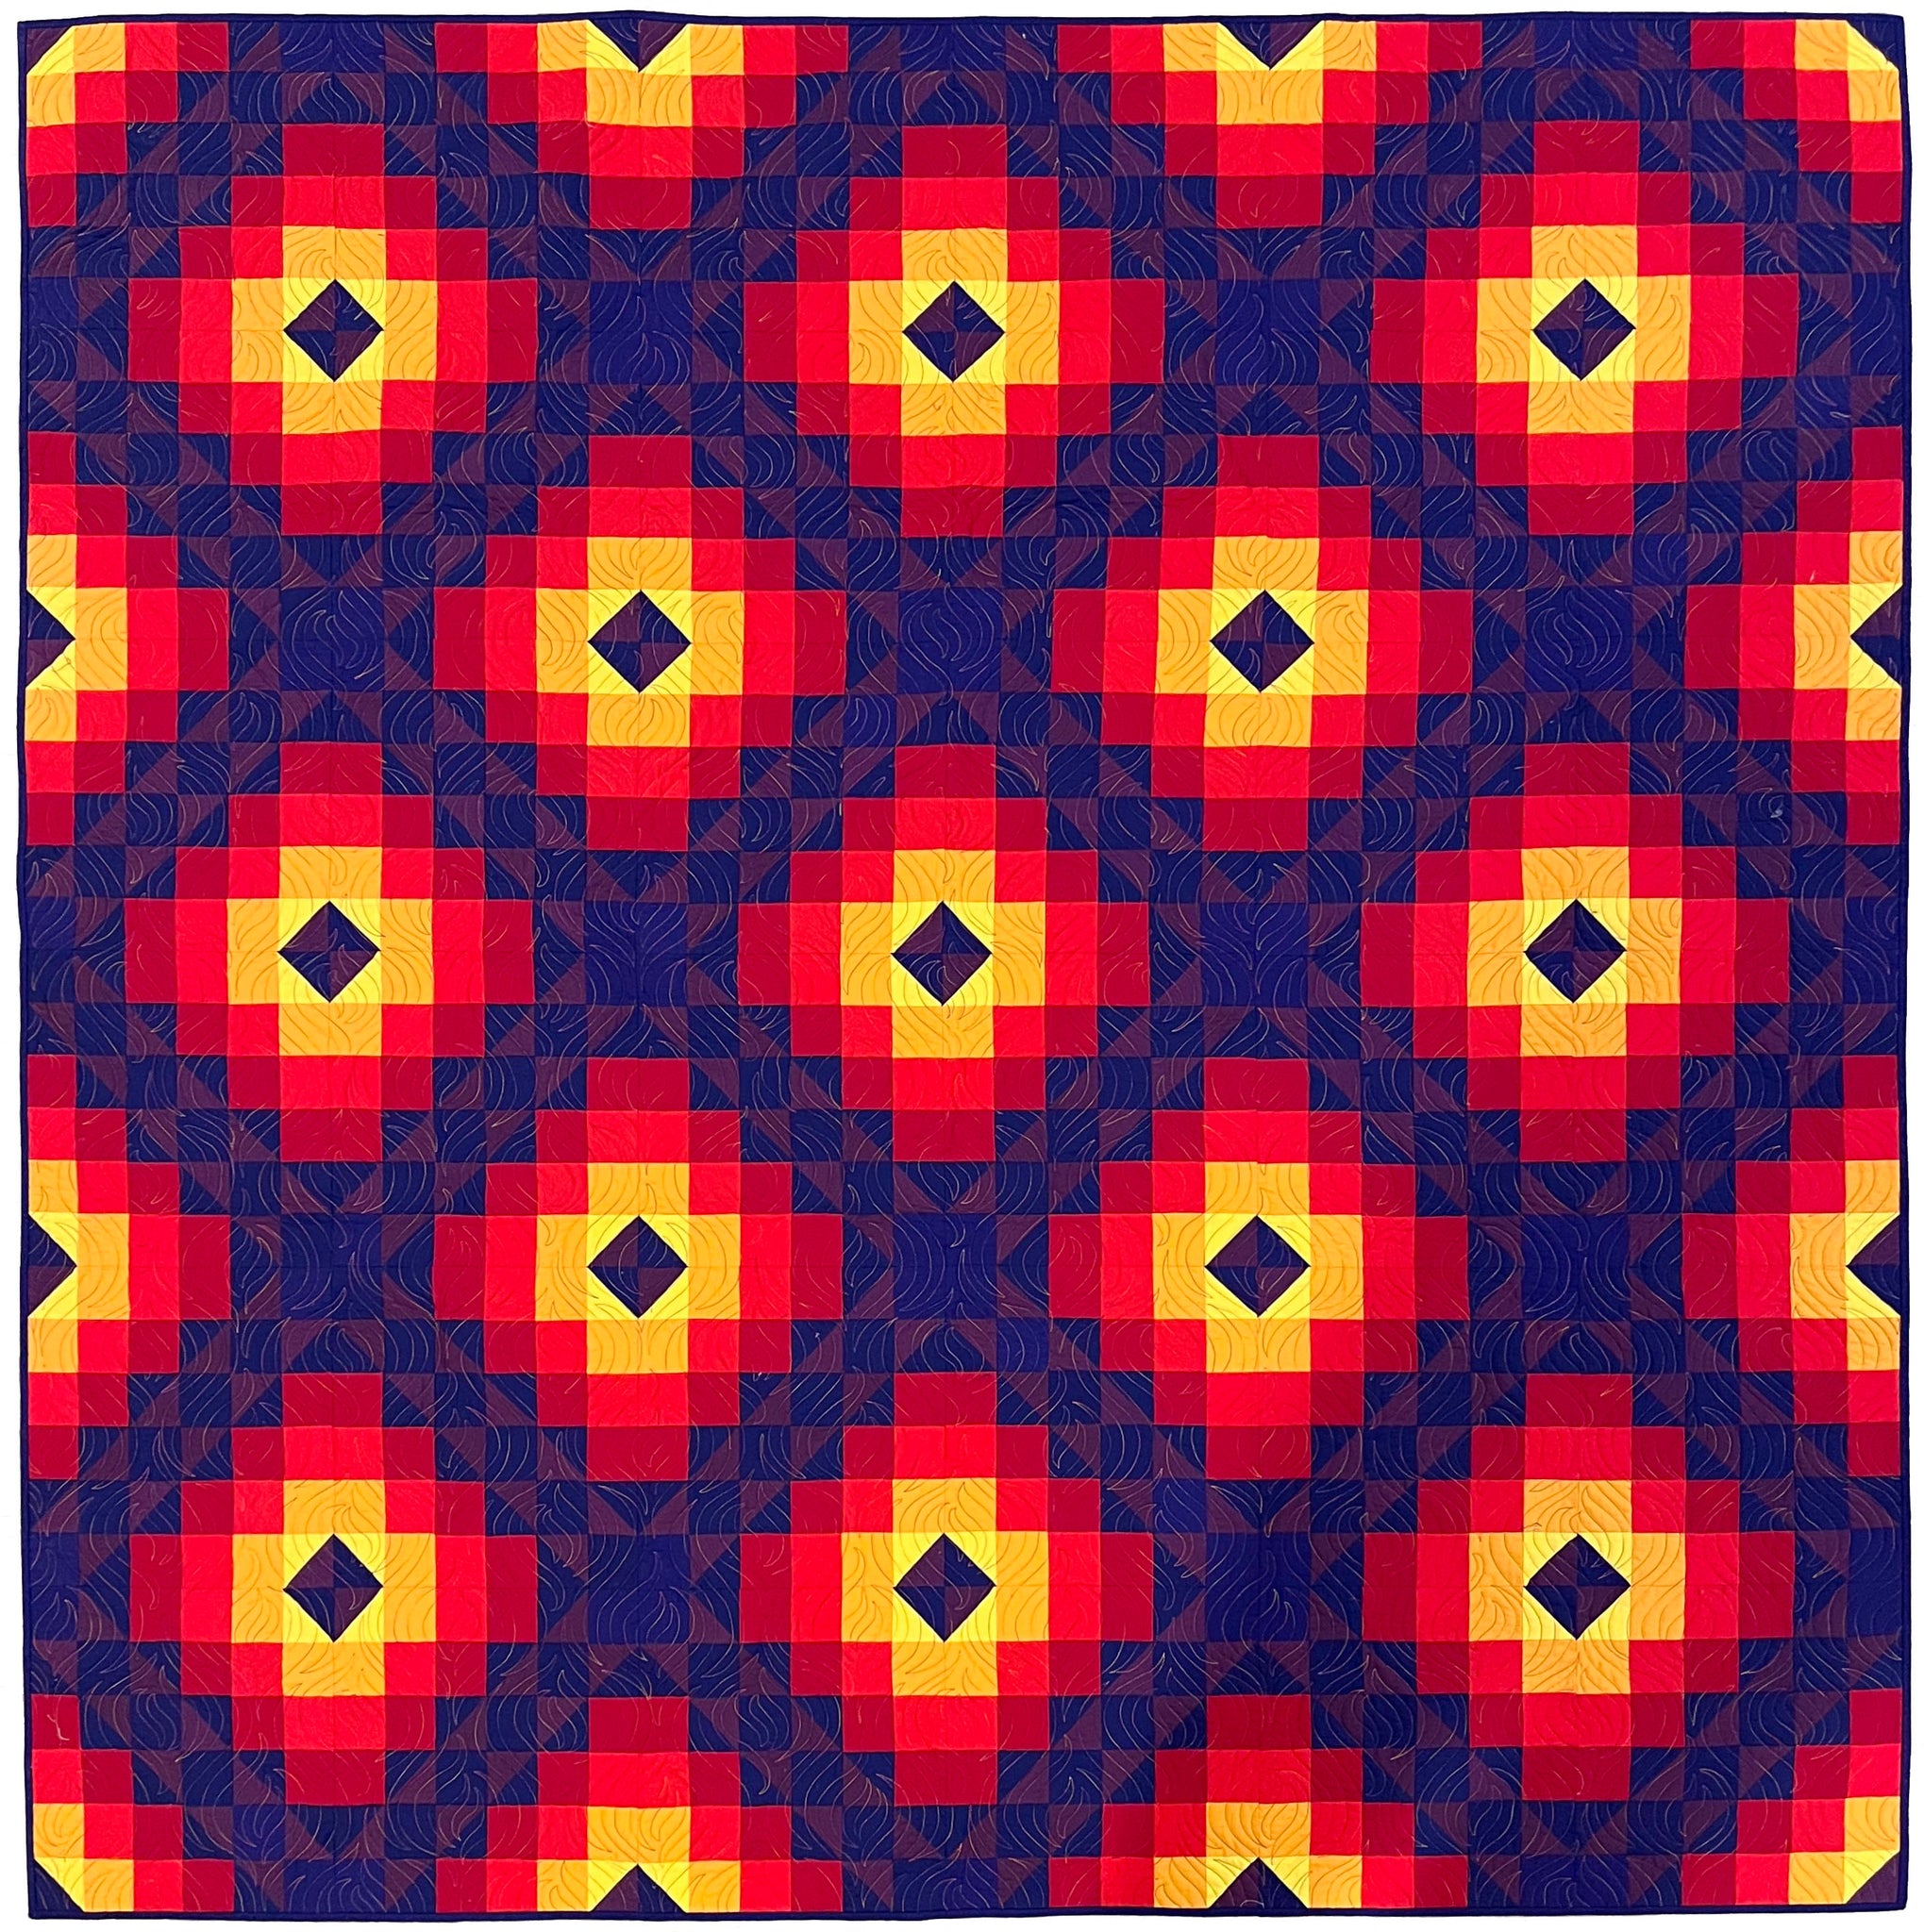 A-OK Sunset 56 by 68 5 Yard Quilt Pattern